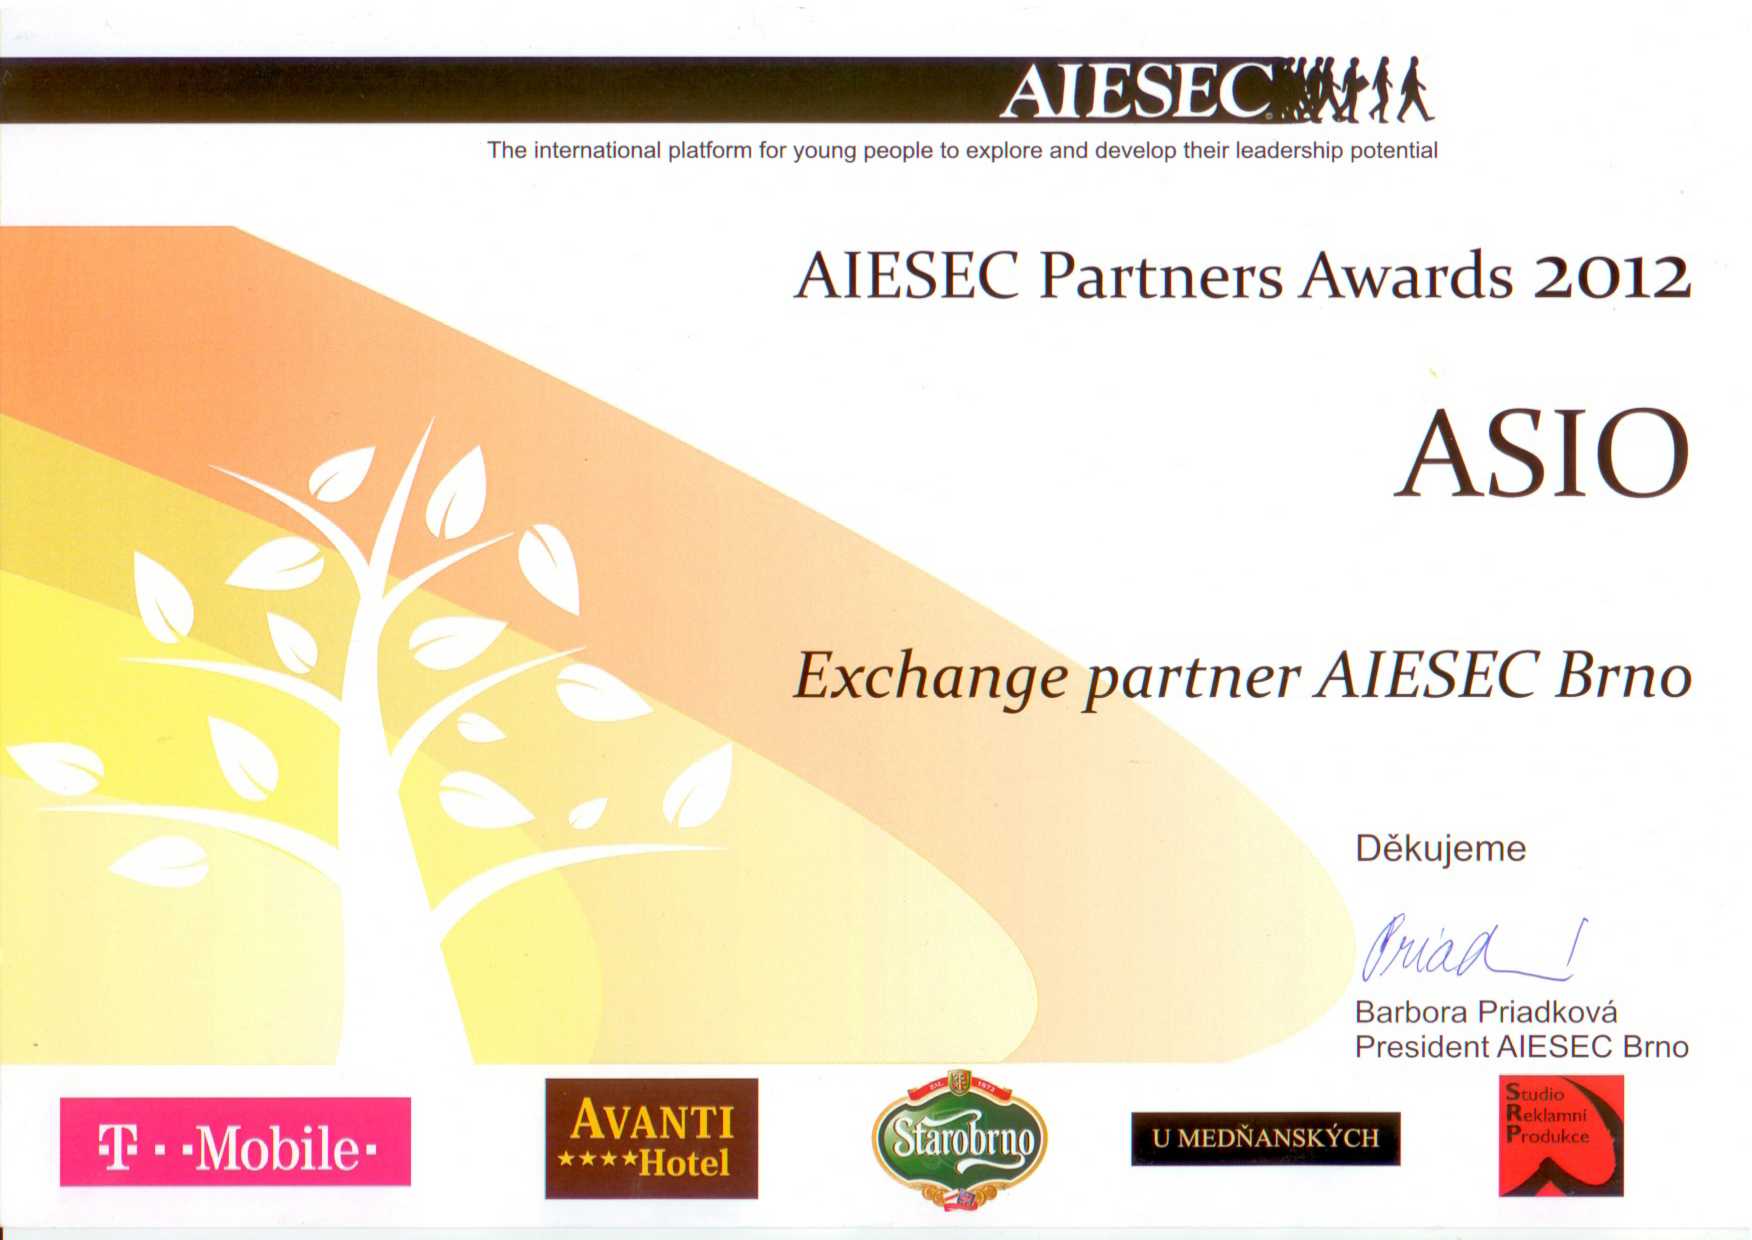 AIESEC PARTNERS AWARDS 2012